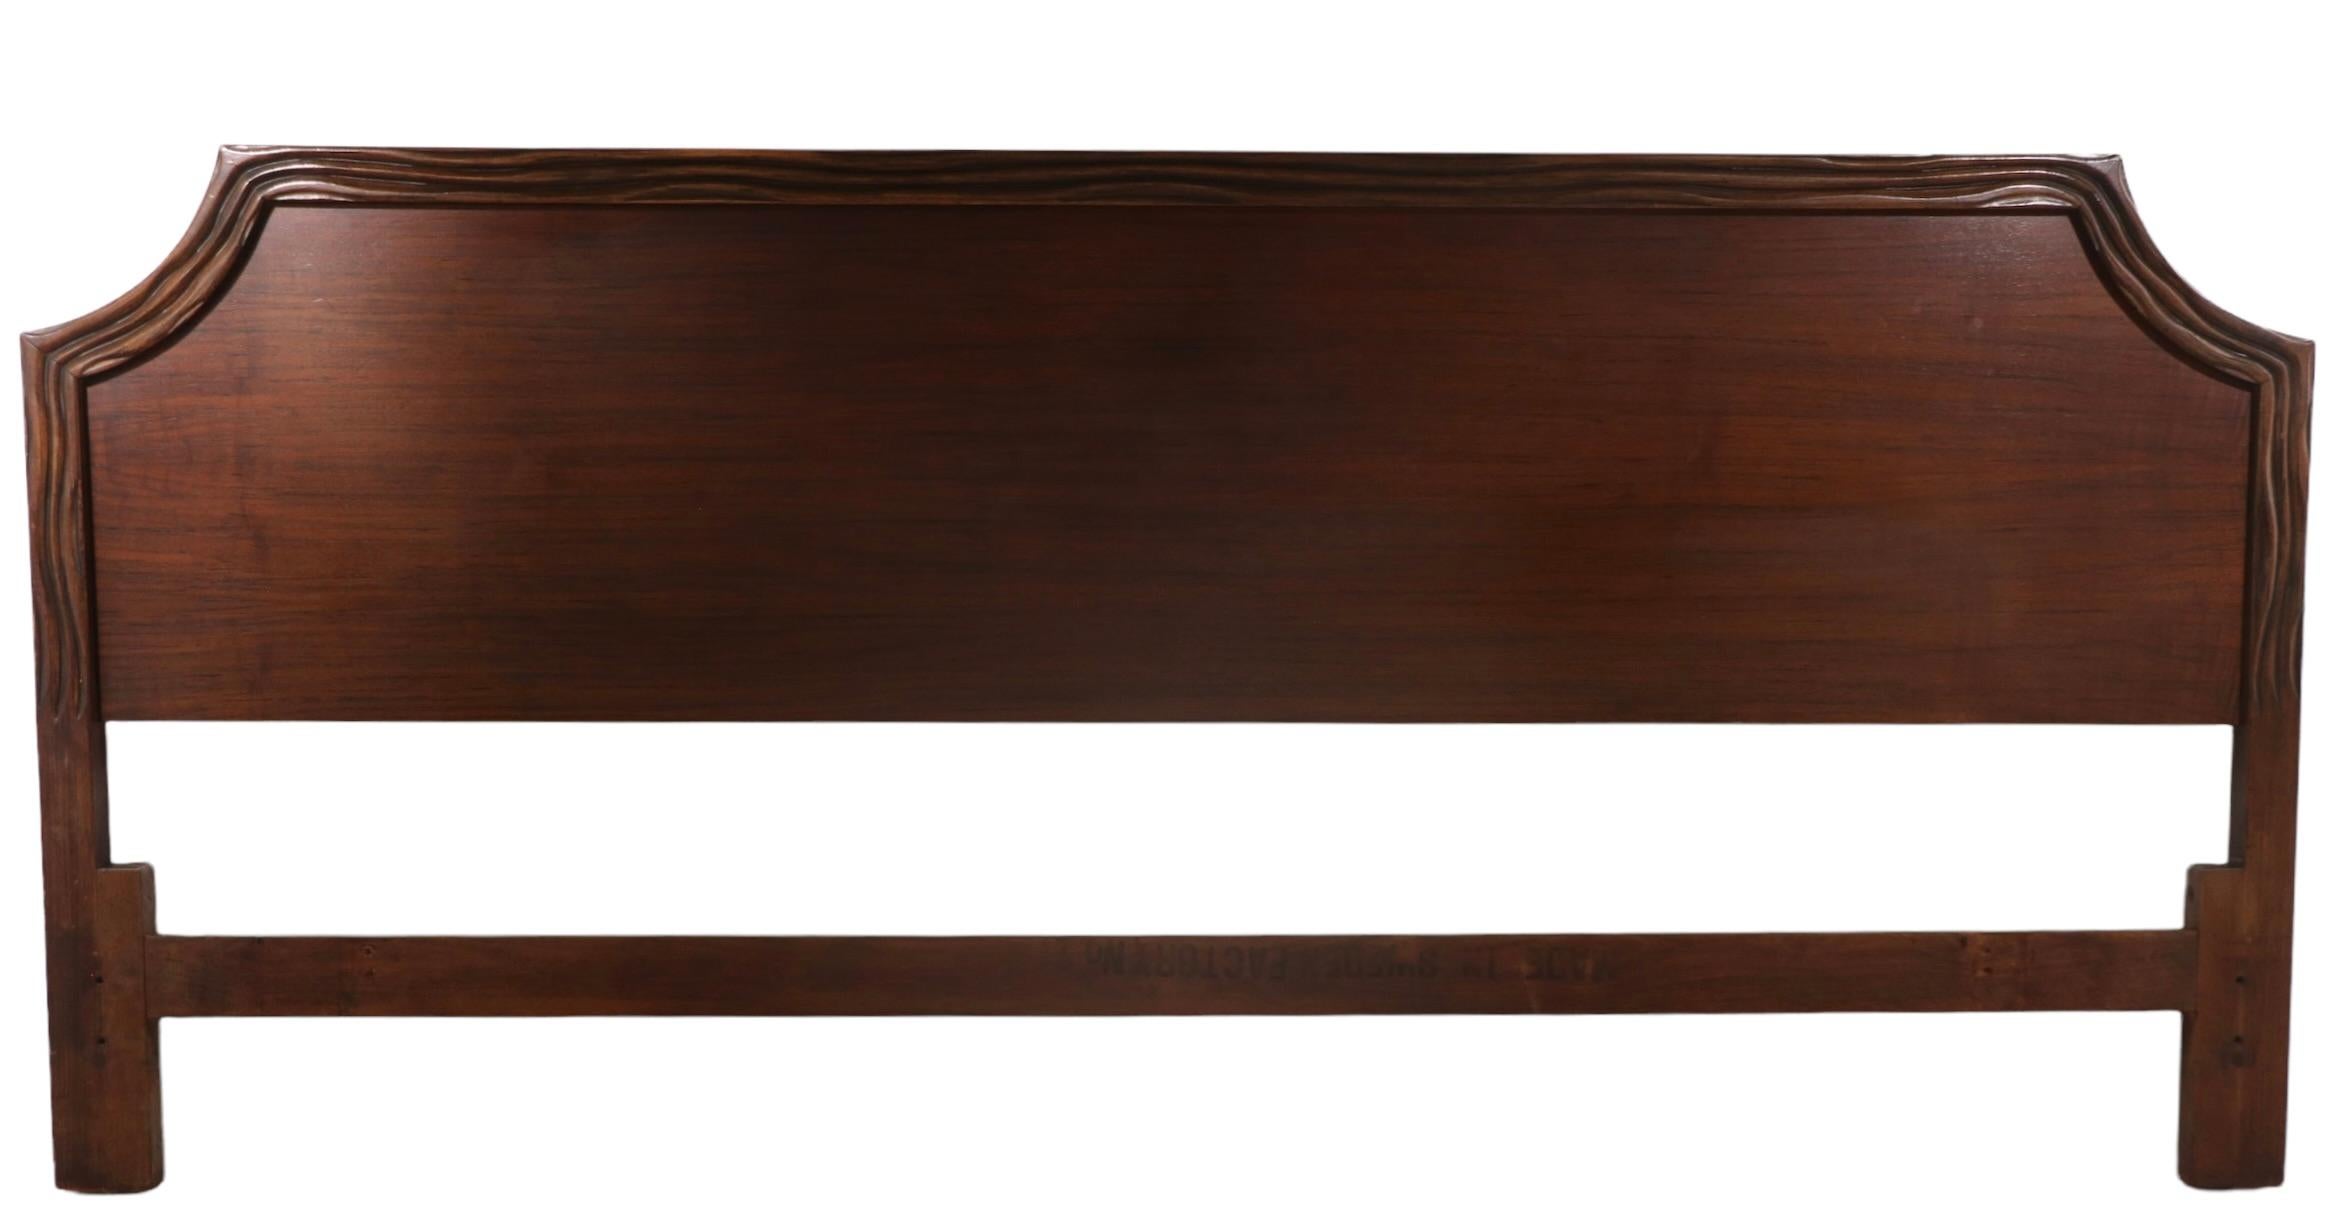 Hollywood Regency King Size Carved Wood Headboard by Edmond Spence Made in Sweden Ca. 1950's